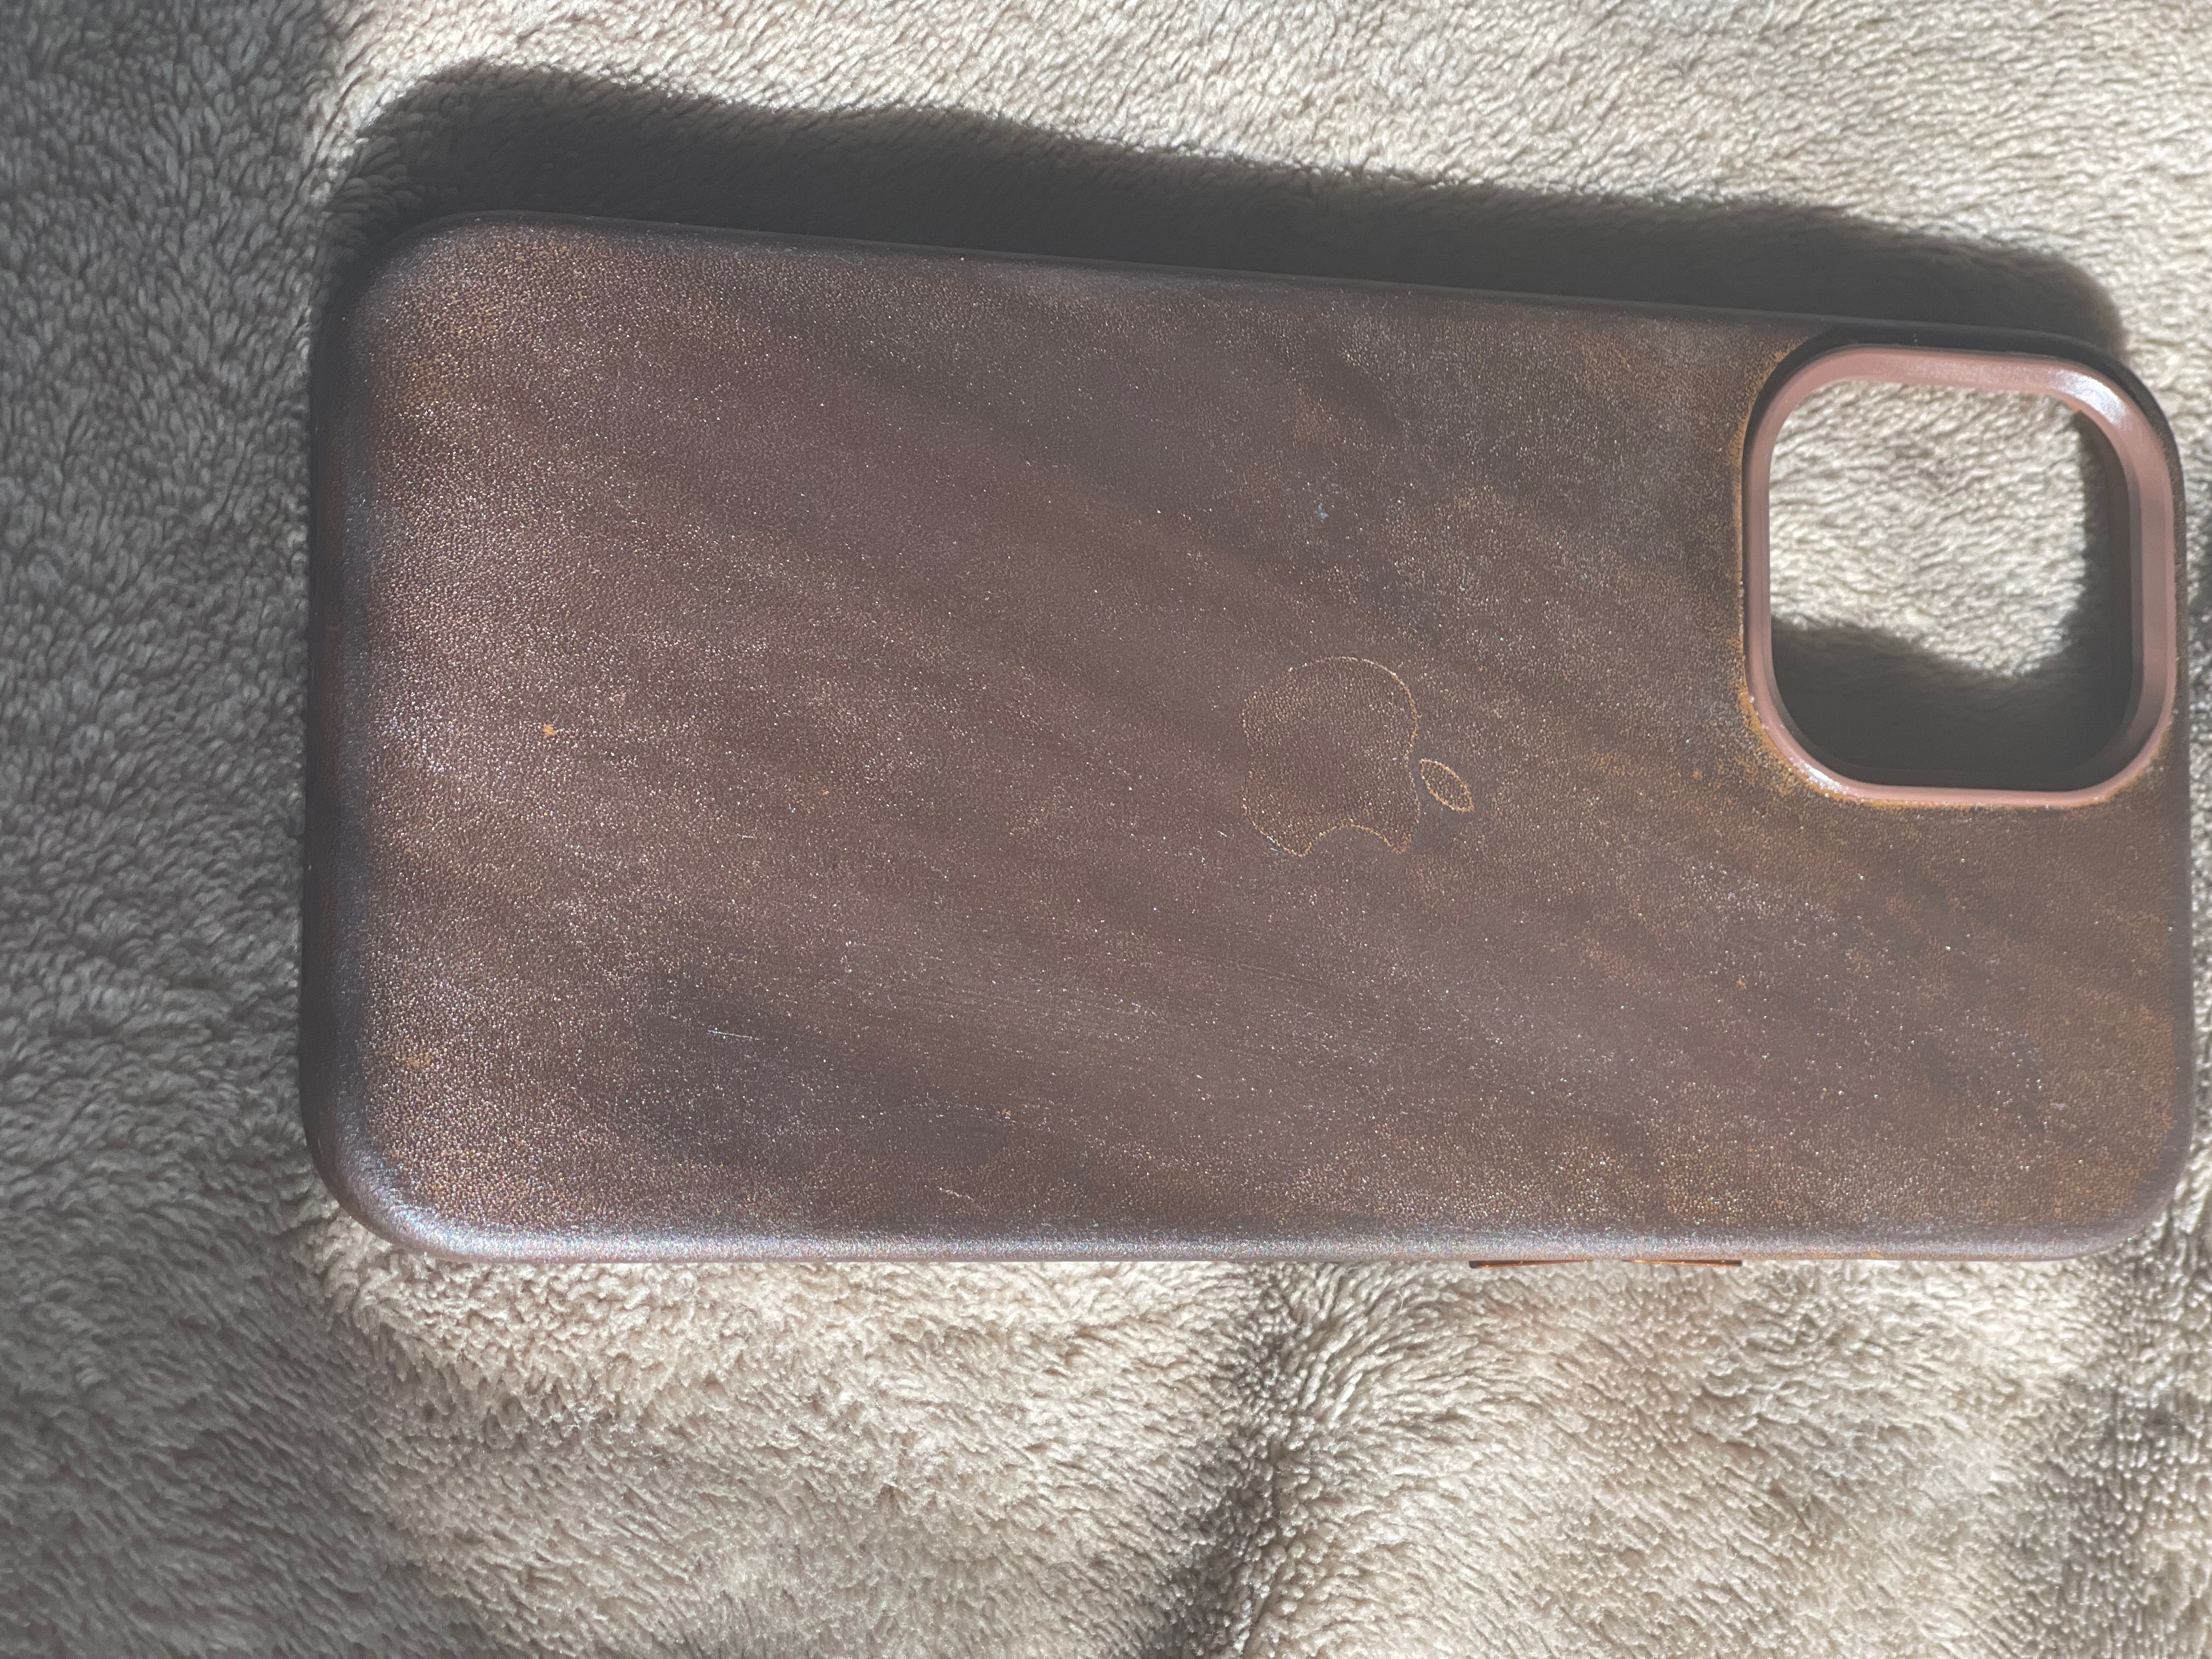 iPhone 12 leather case patina 3 months : r/iPhone12